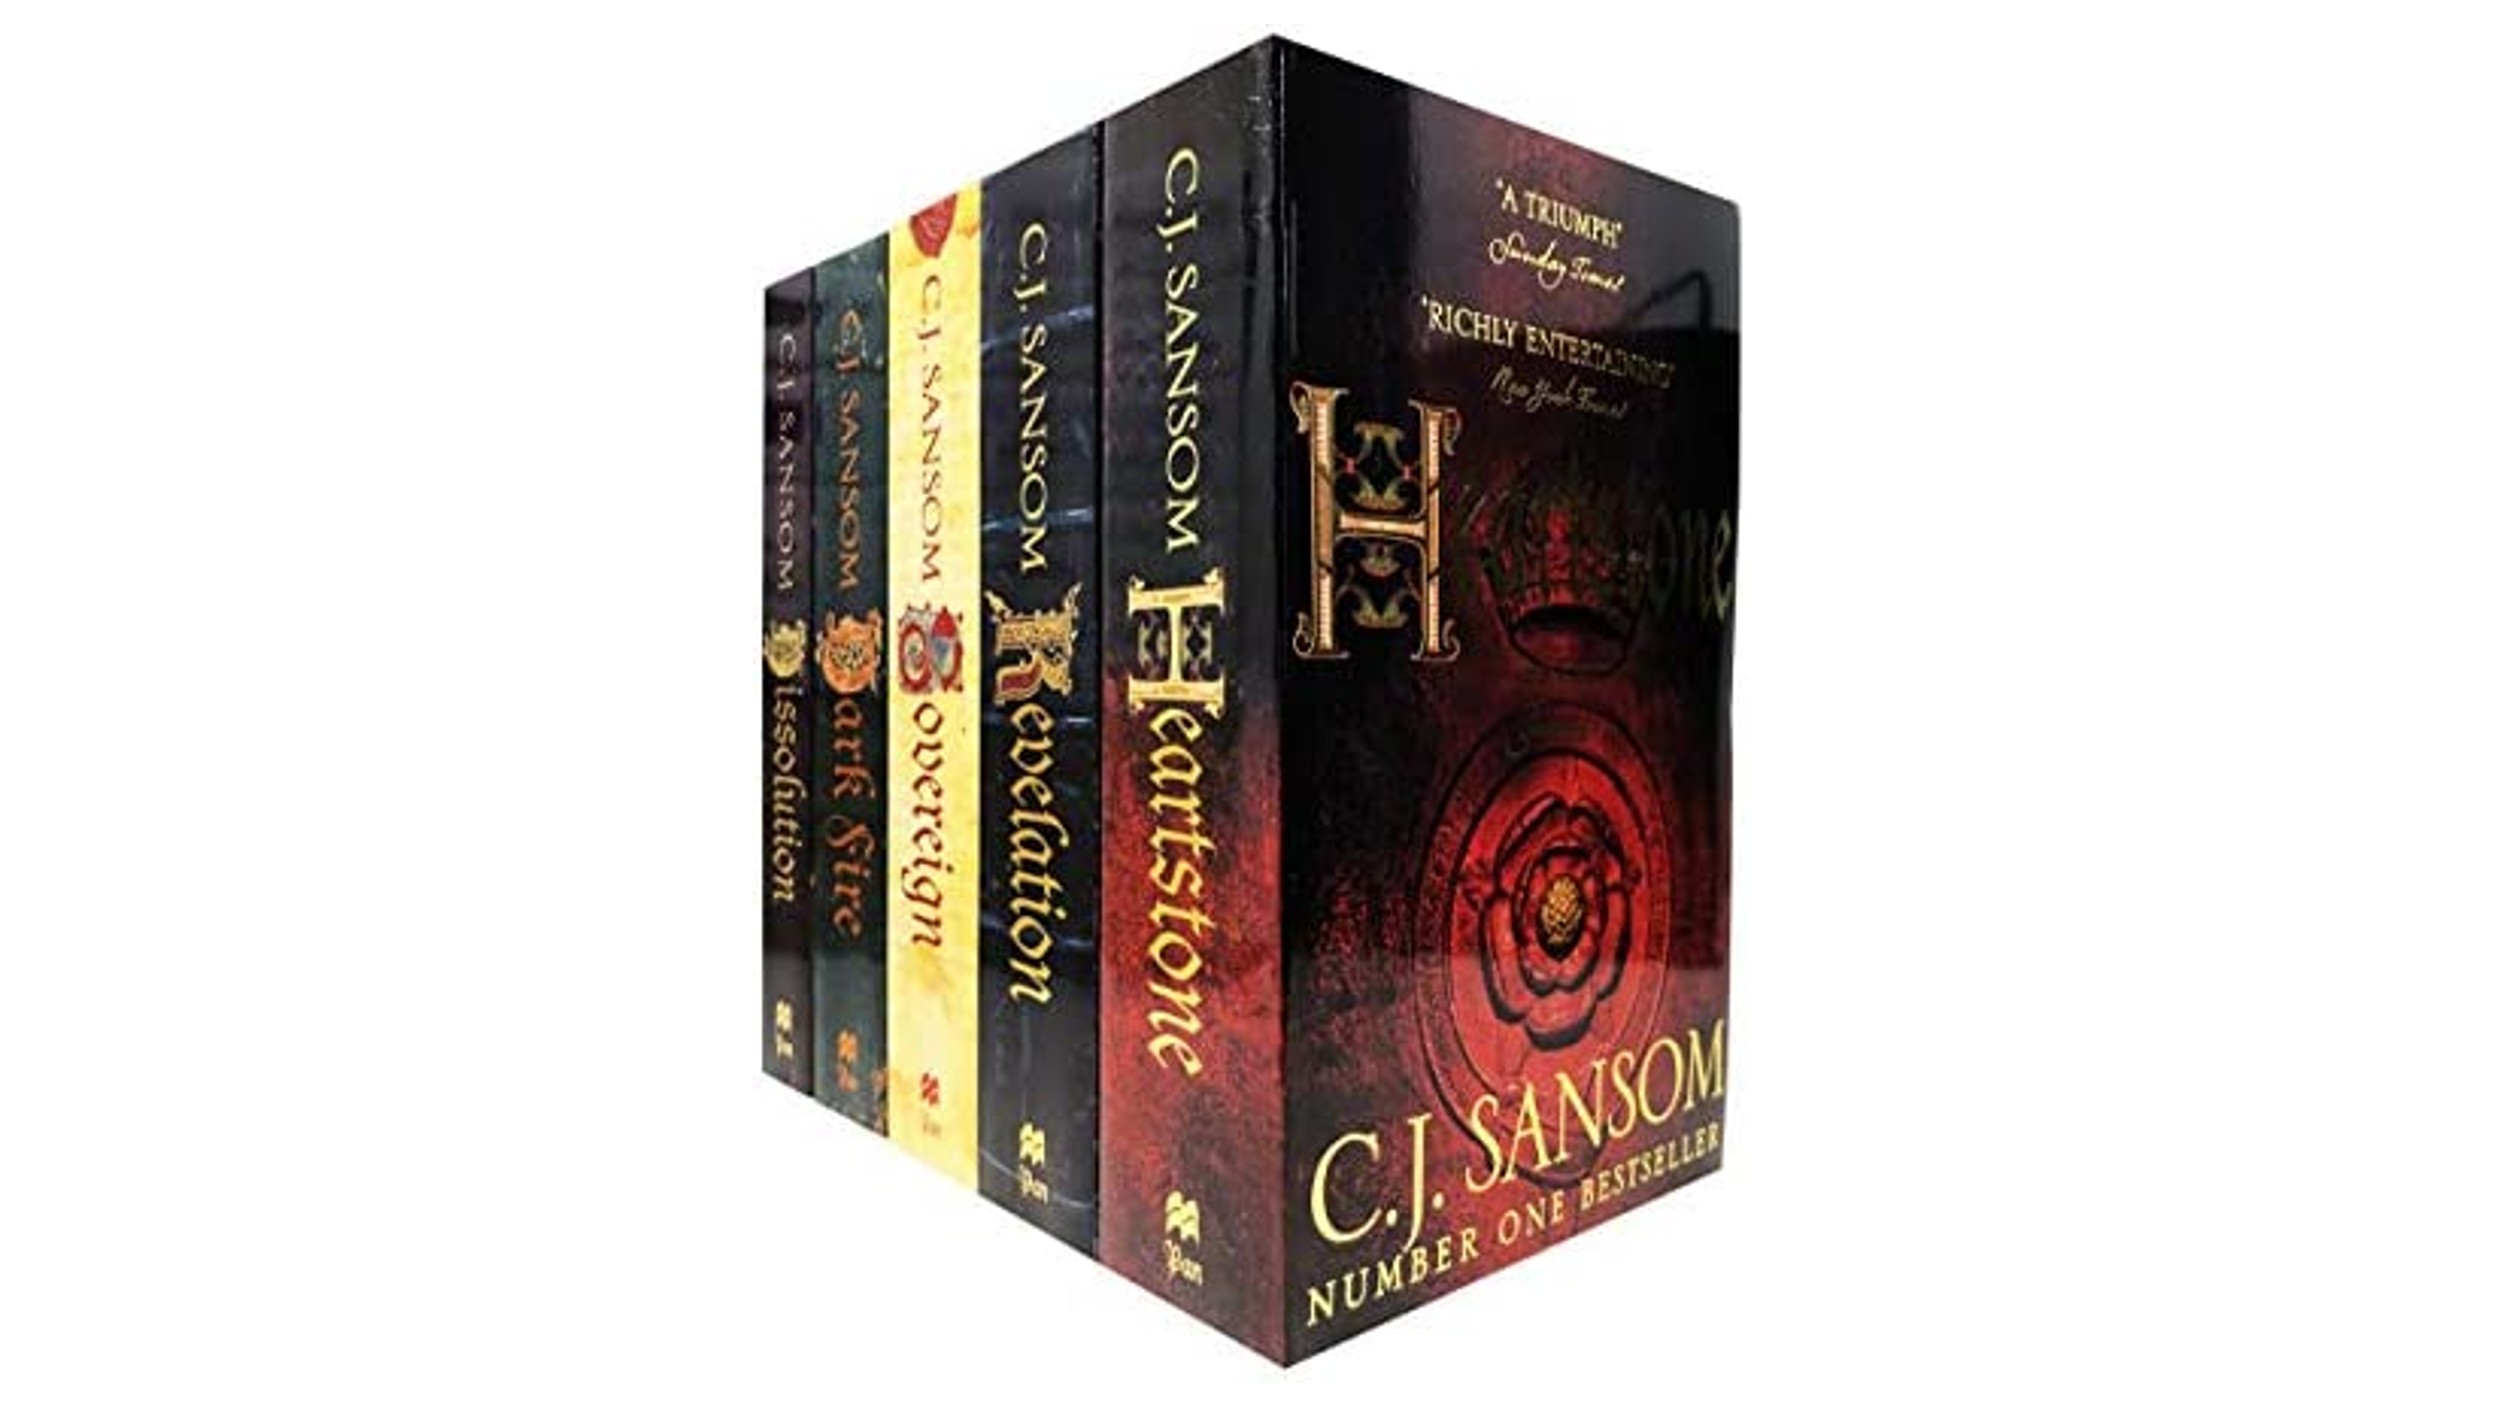 The first five Shardlake novels in a box set collection